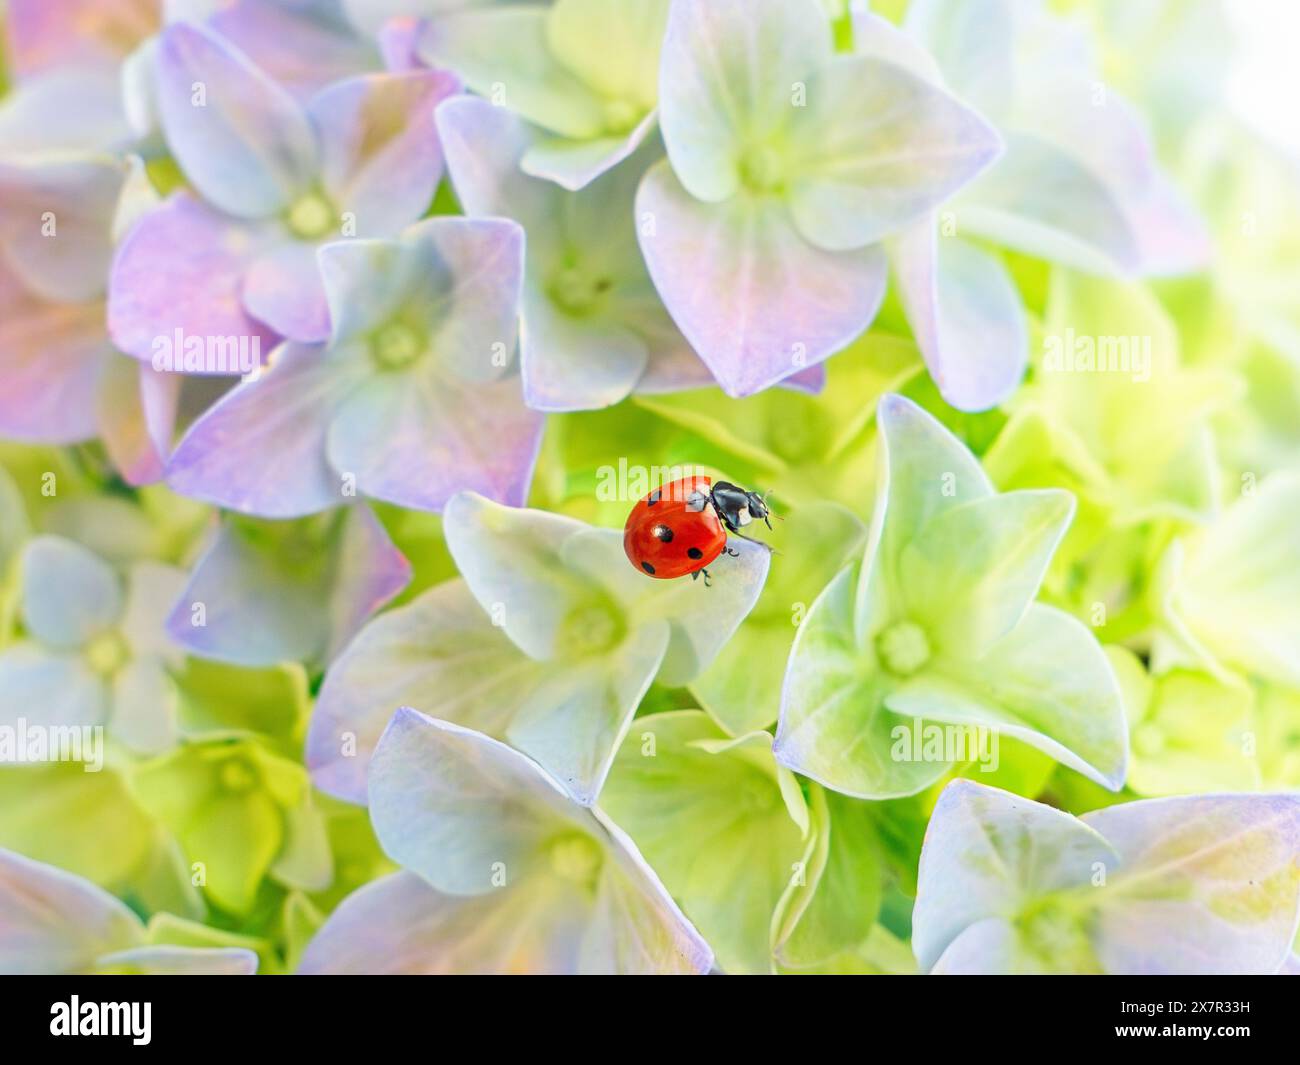 A vibrant ladybug explores the soft hues of a hydrangea flower cluster showcasing nature's marvel in macro photography. Stock Photo